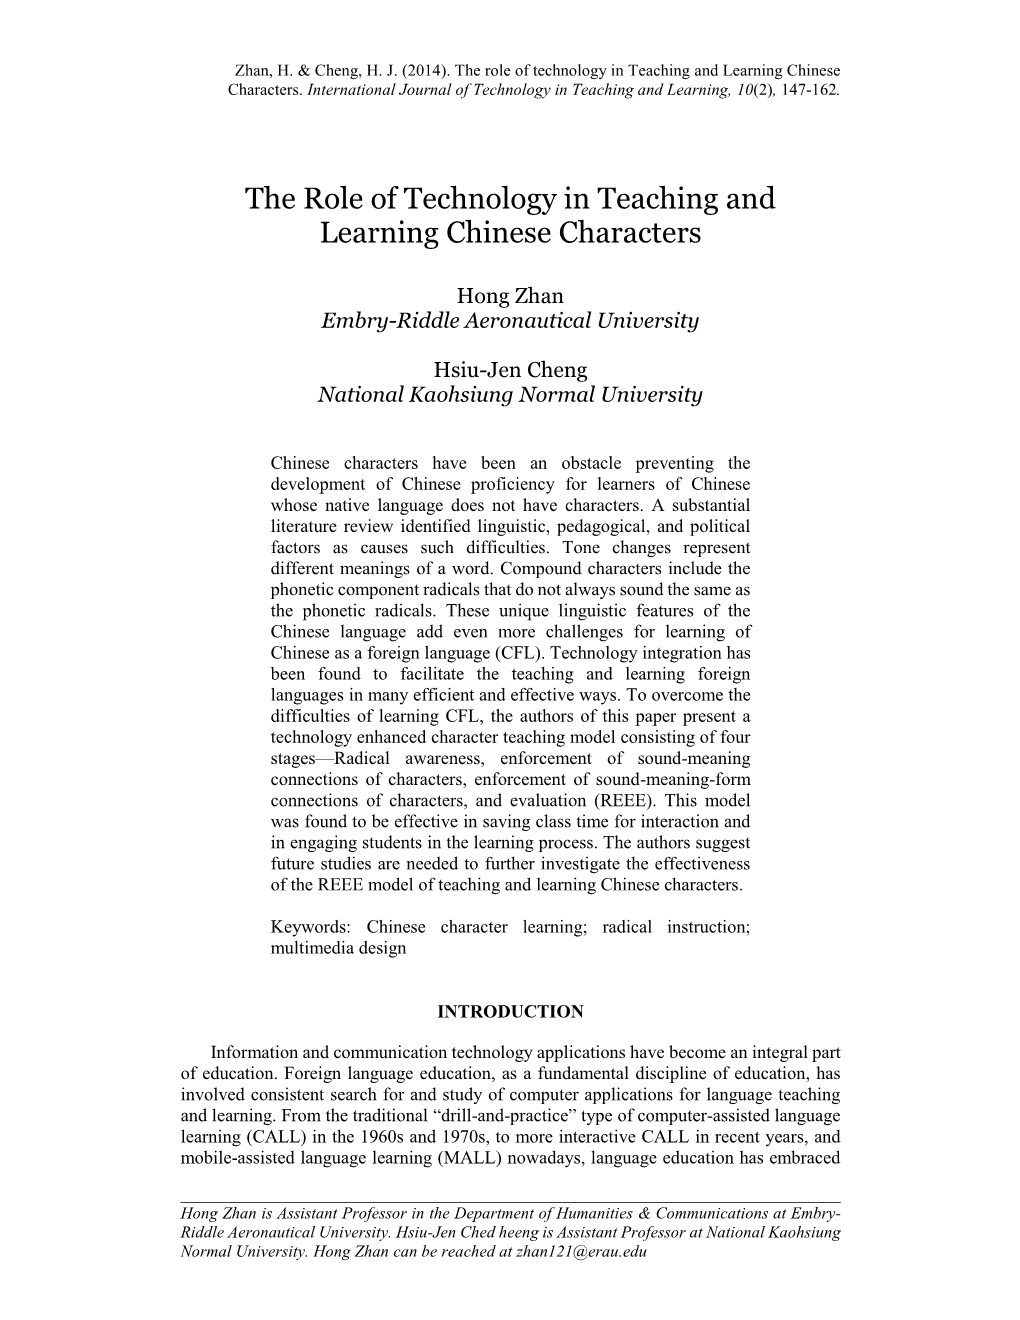 The Role of Technology in Teaching and Learning Chinese Characters